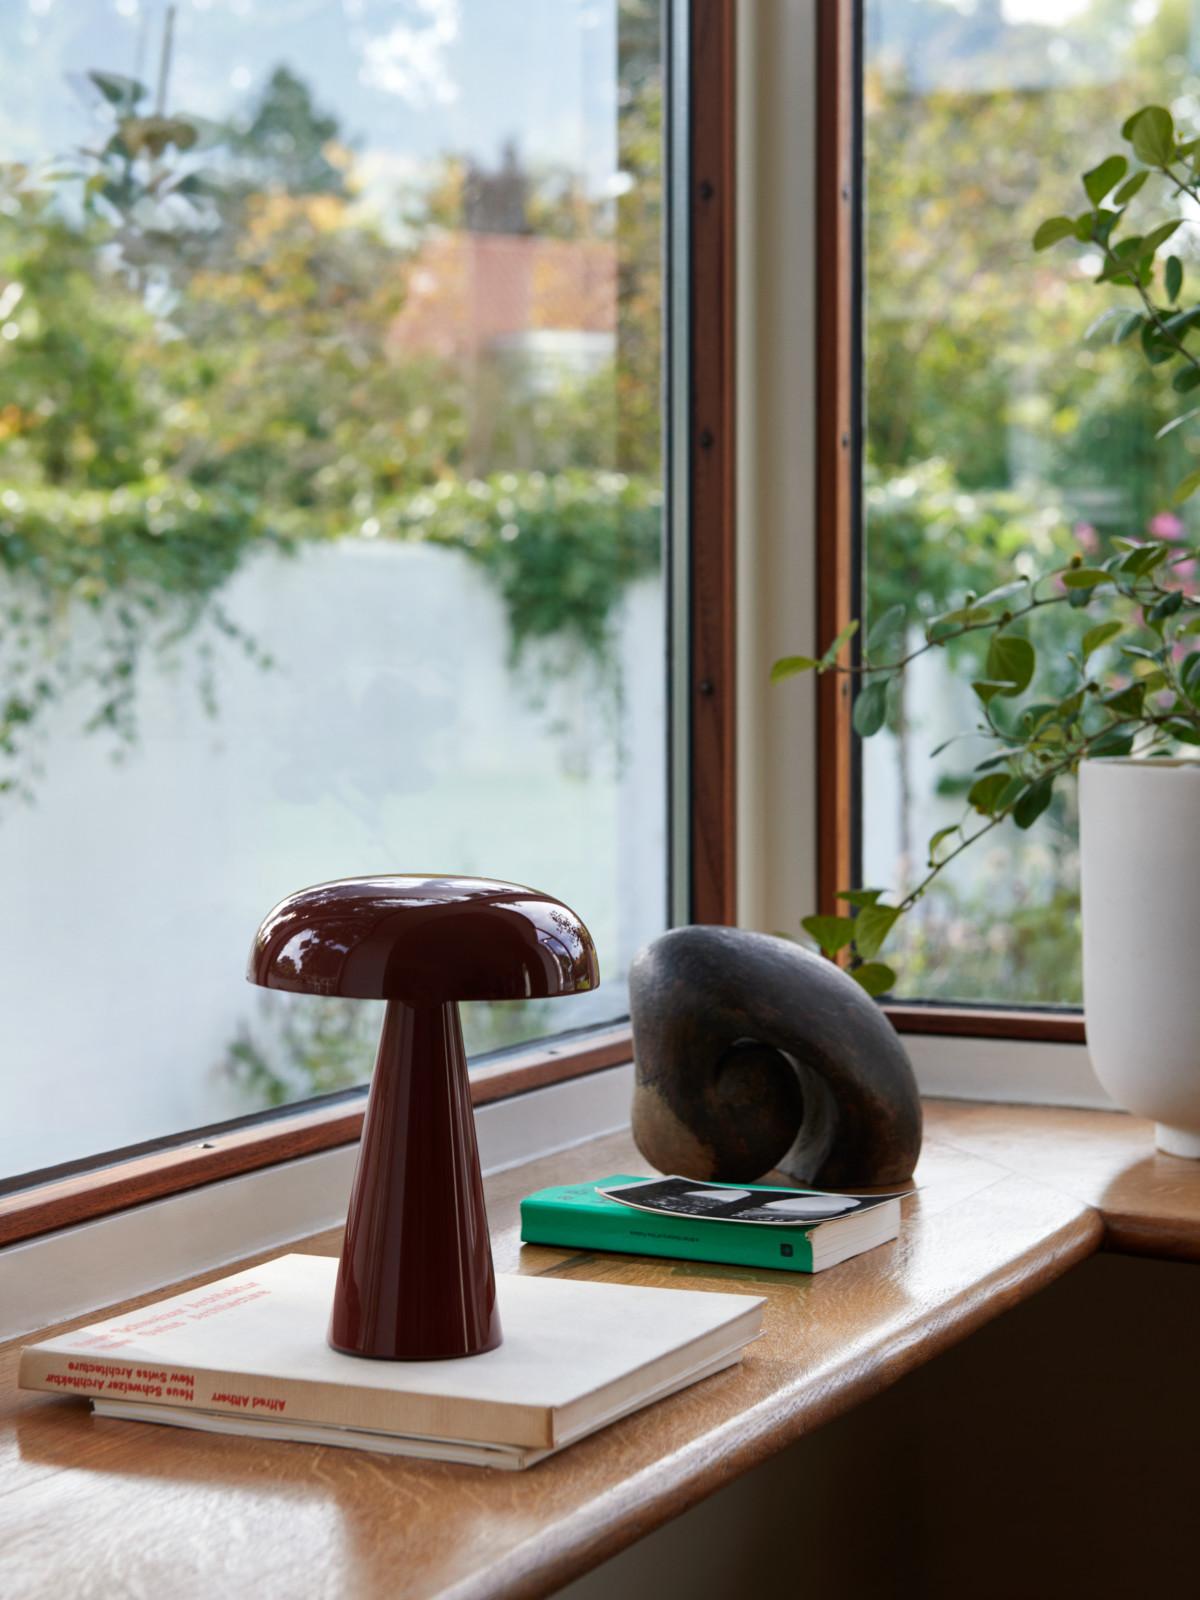 Match lighting to mood with Como SC53, a portable table lamp from Space Copenhagen. 
Crafted from anodized aluminium, Como’s sturdy base tapers up towards a softy curved, mushroom-shaped shade. 
This battery-powered lamp can operate for eleven